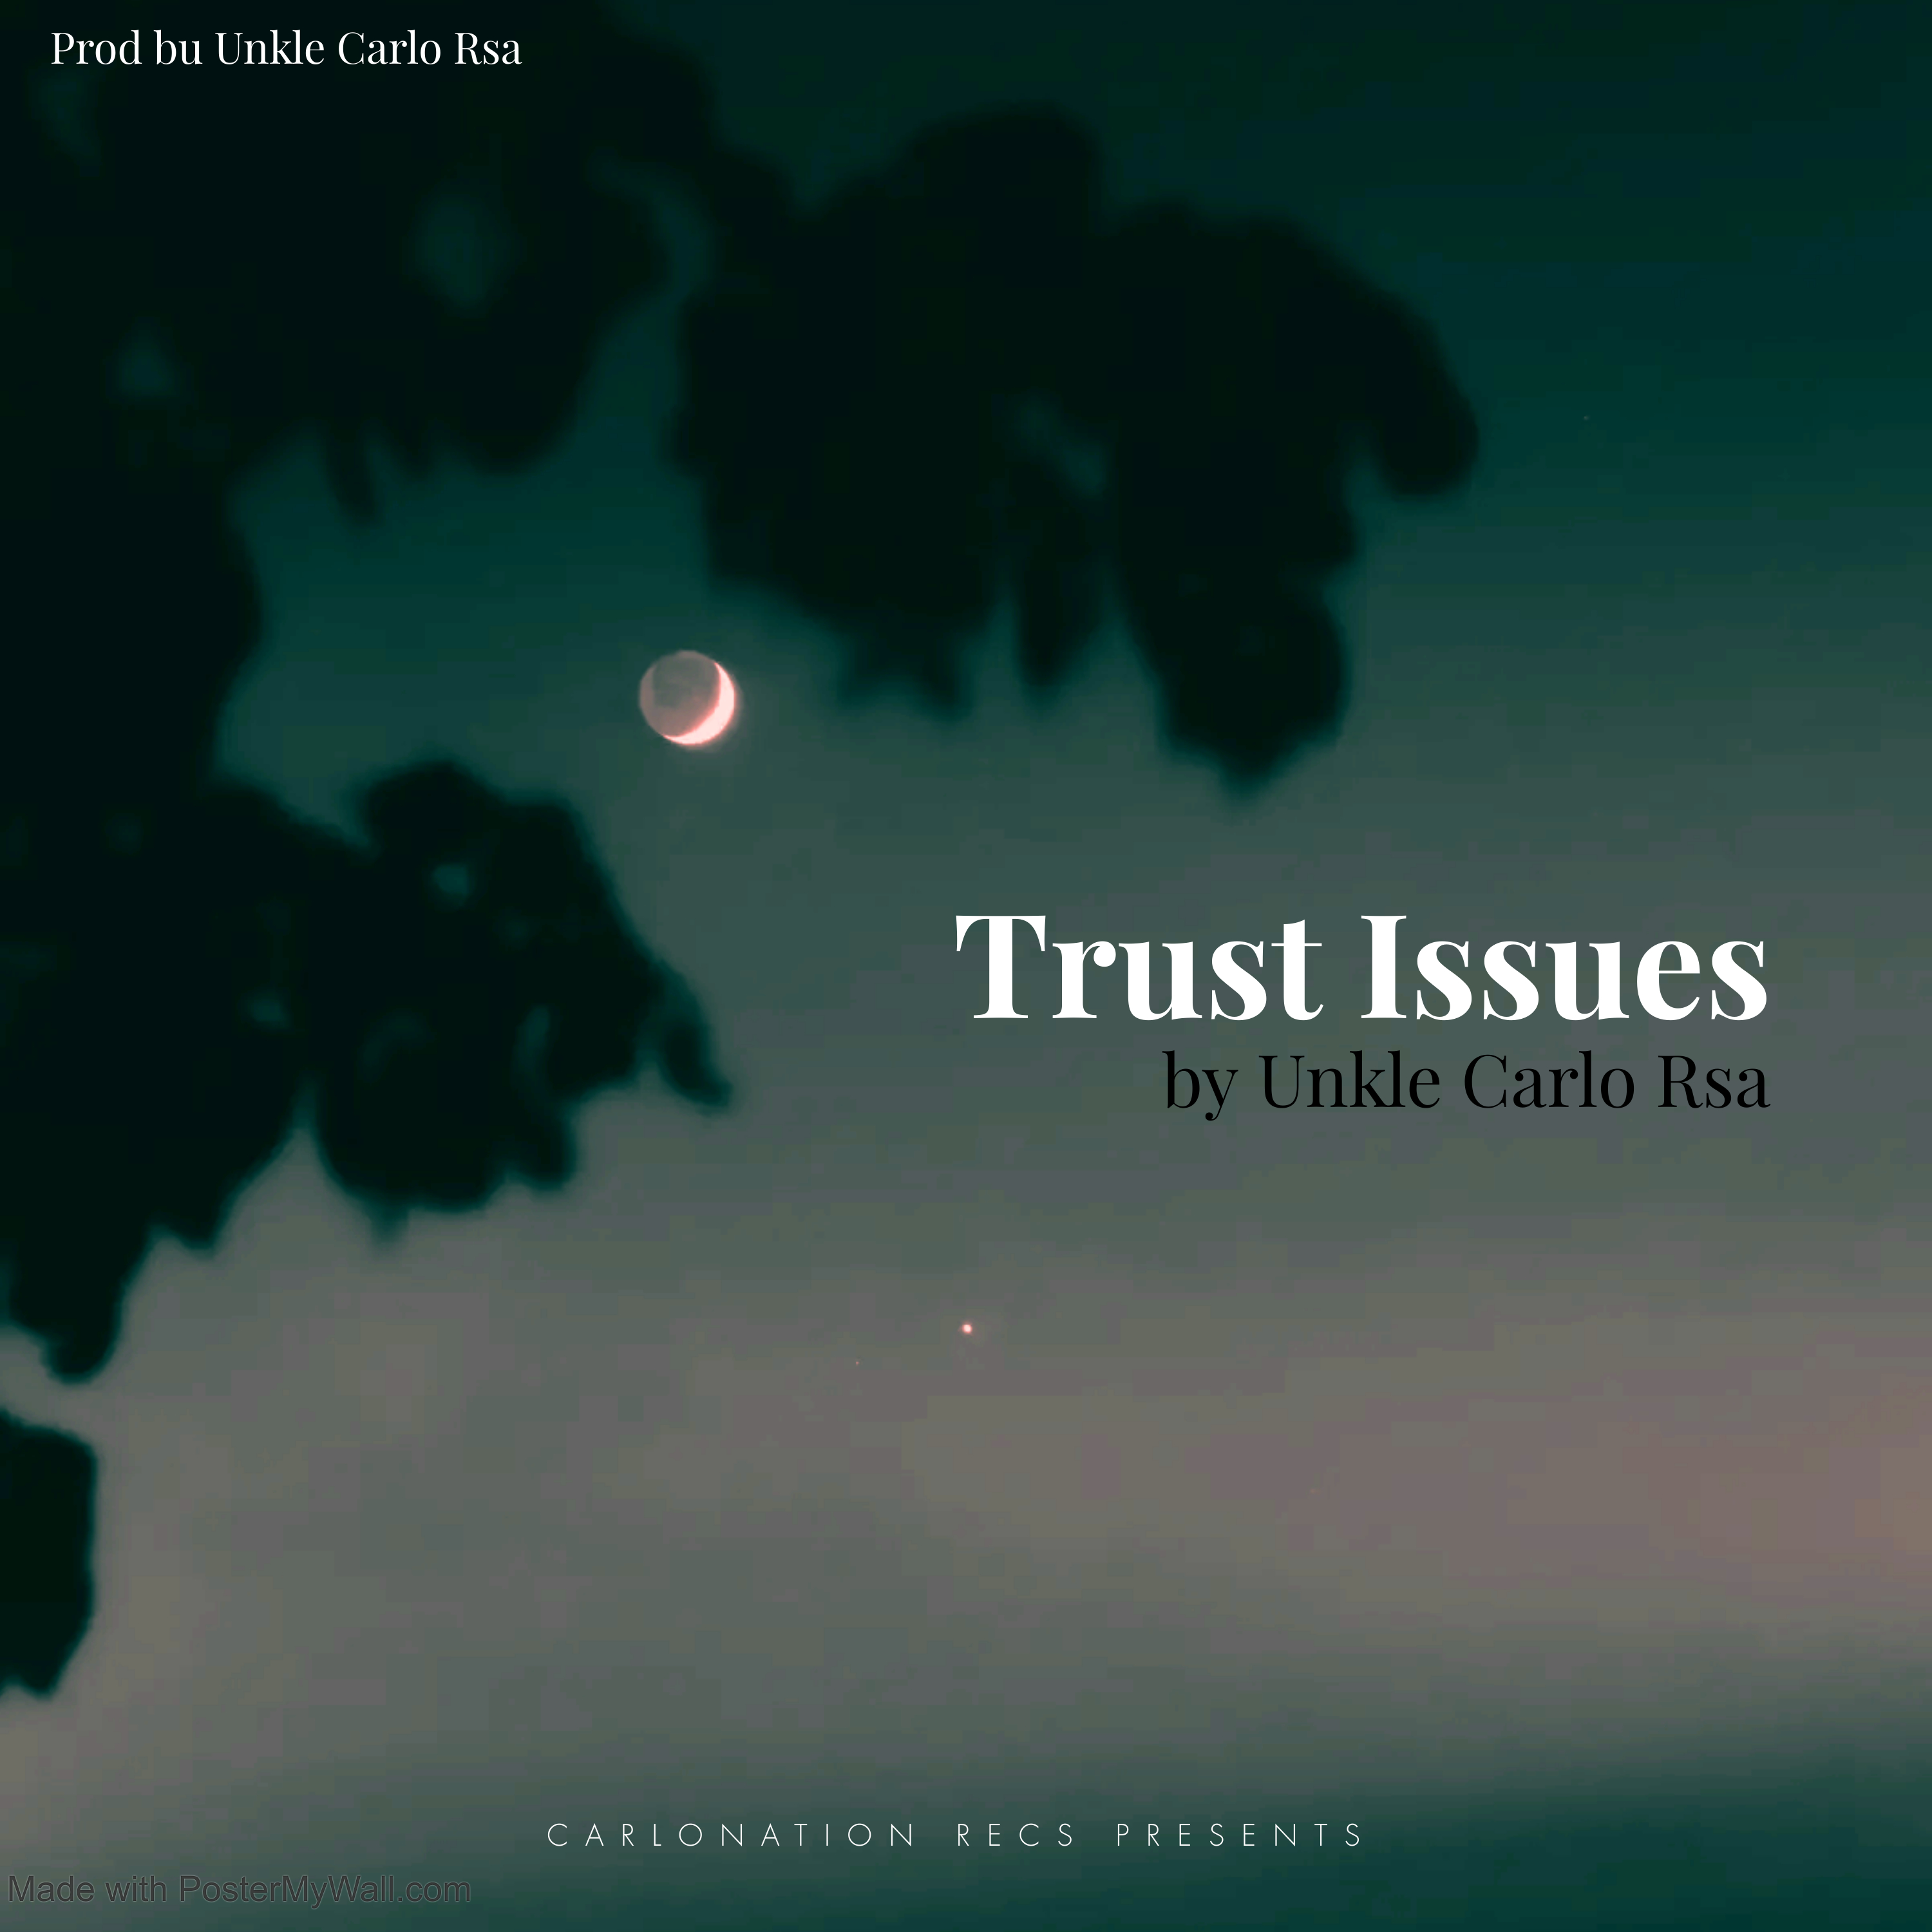 Trust Issues [ official audio ] - Unkle Carlo Rsa